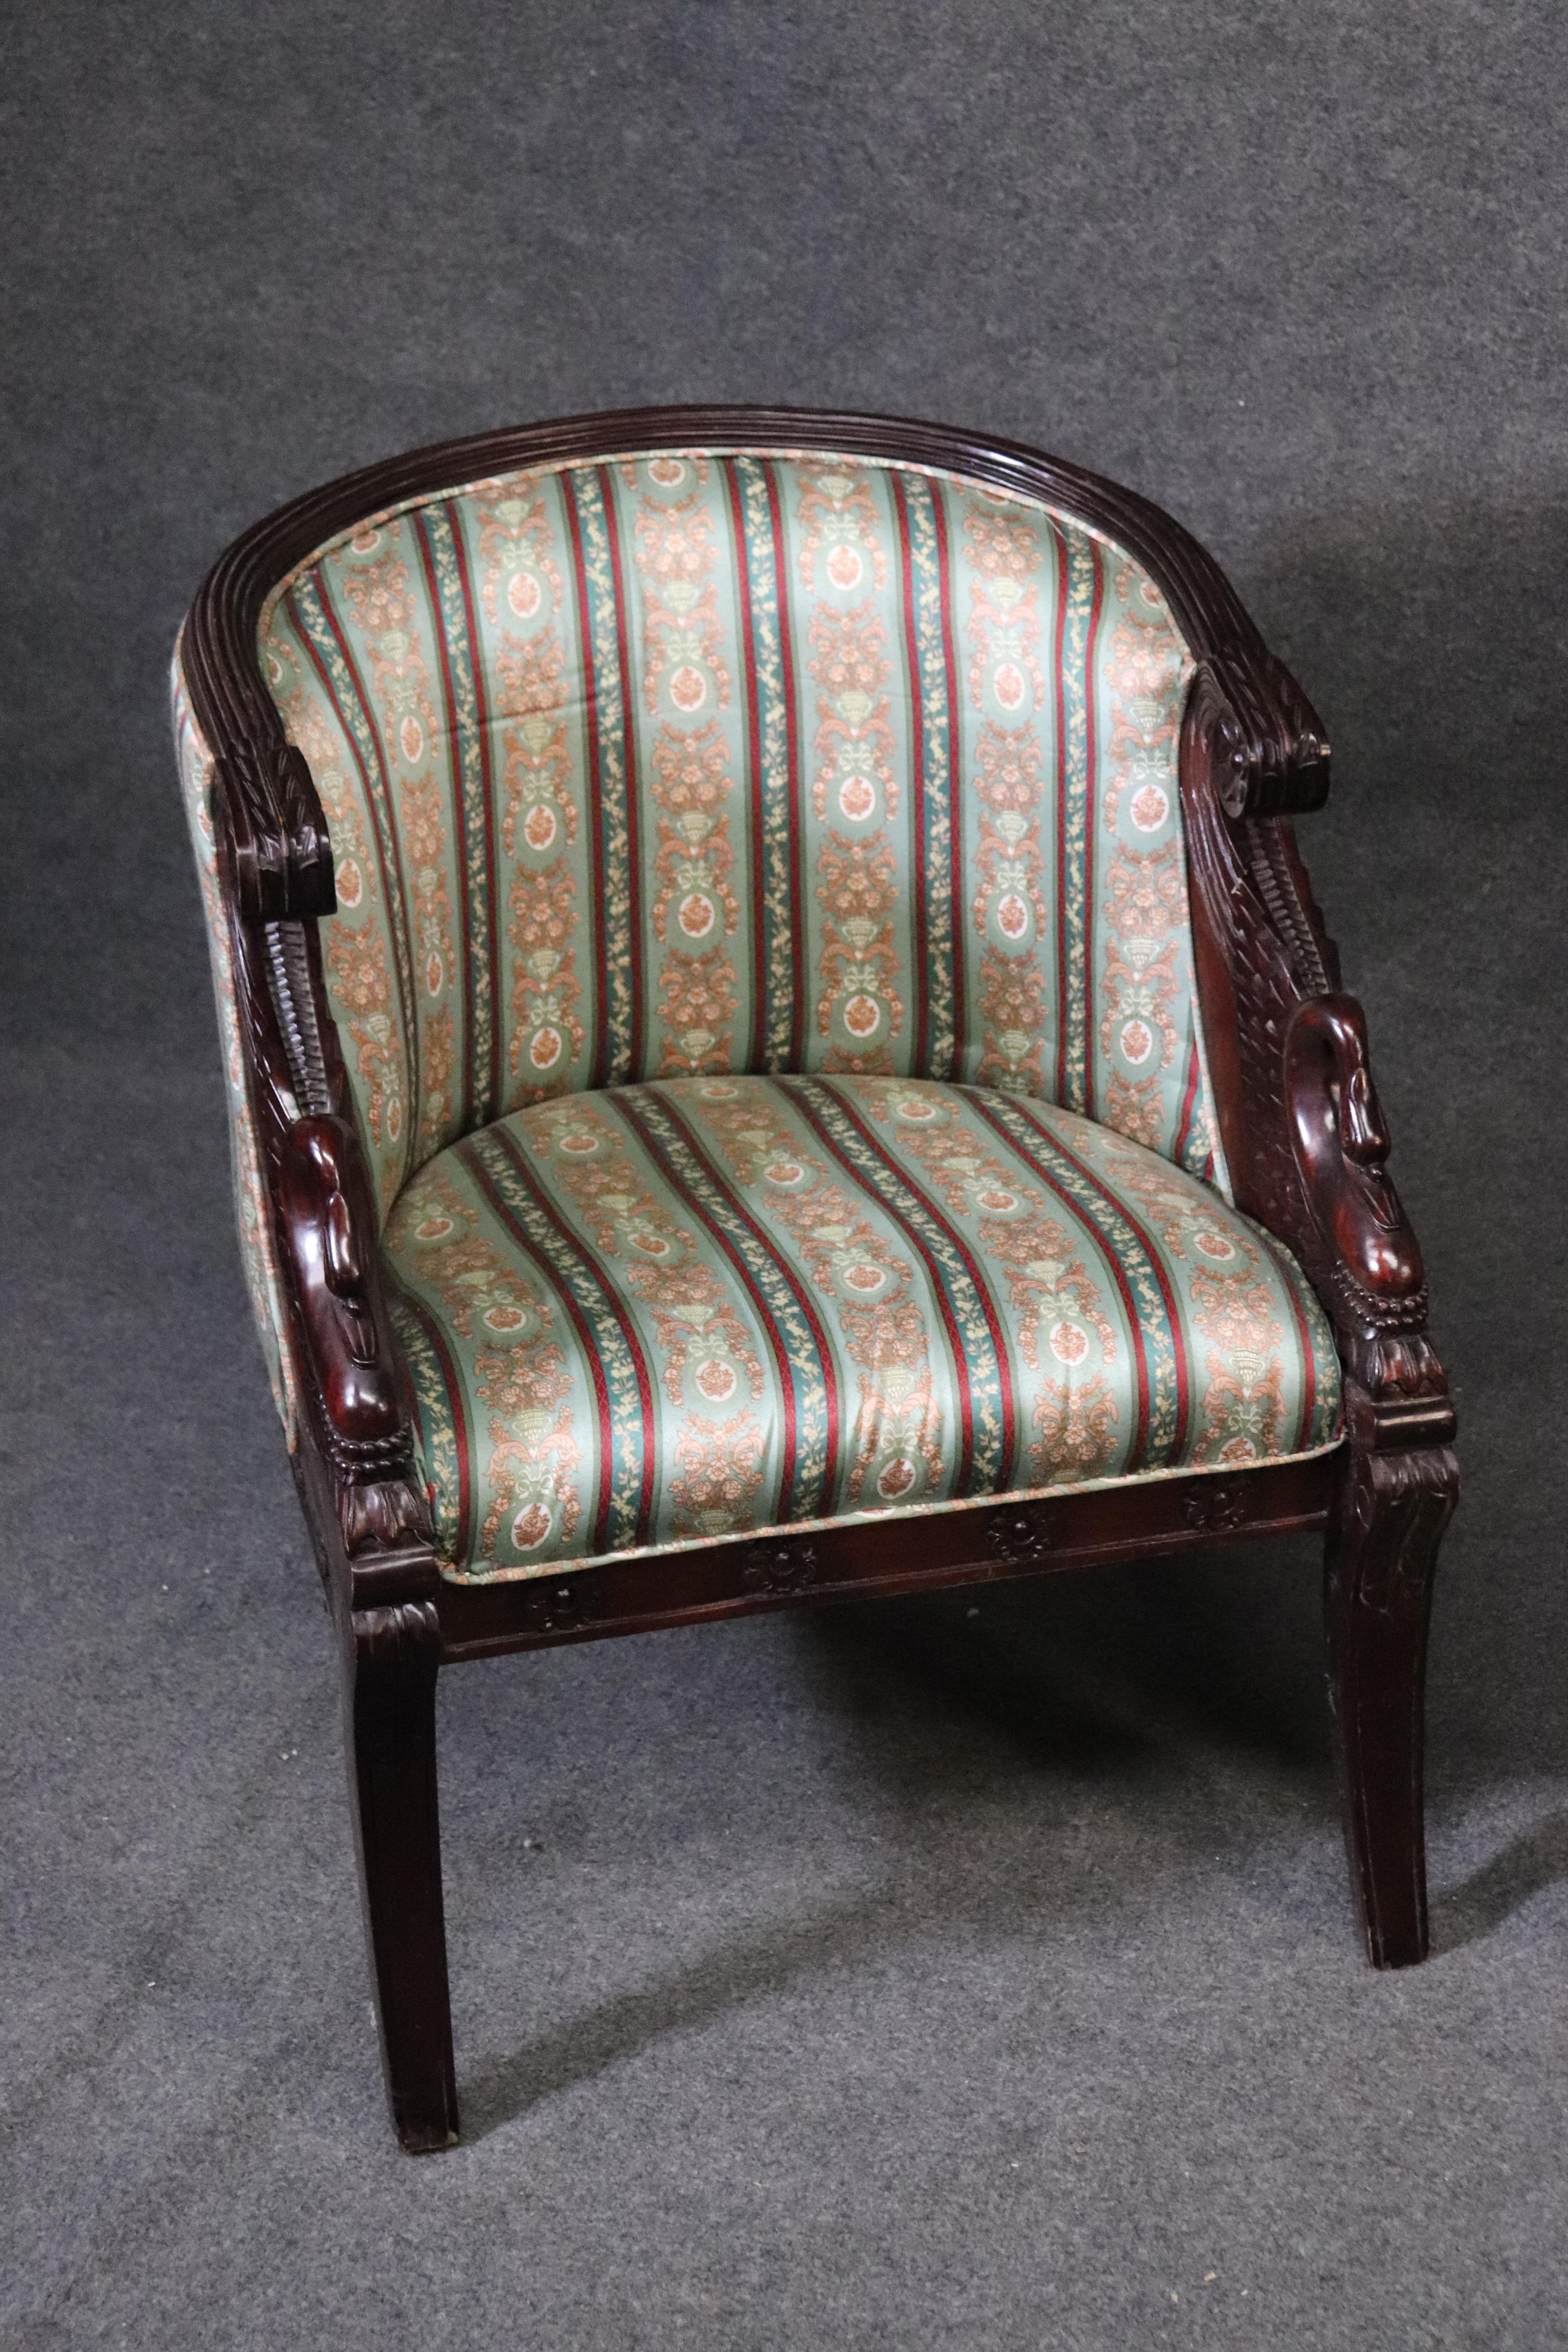 These are beautiful swan carved club chairs with wonderful design elements and a great looks. They are in good used condition and date to the 1950s era. They each measures 33 inches tall x 26 inches wide x 23 inches deep x seat height of 18 inches.